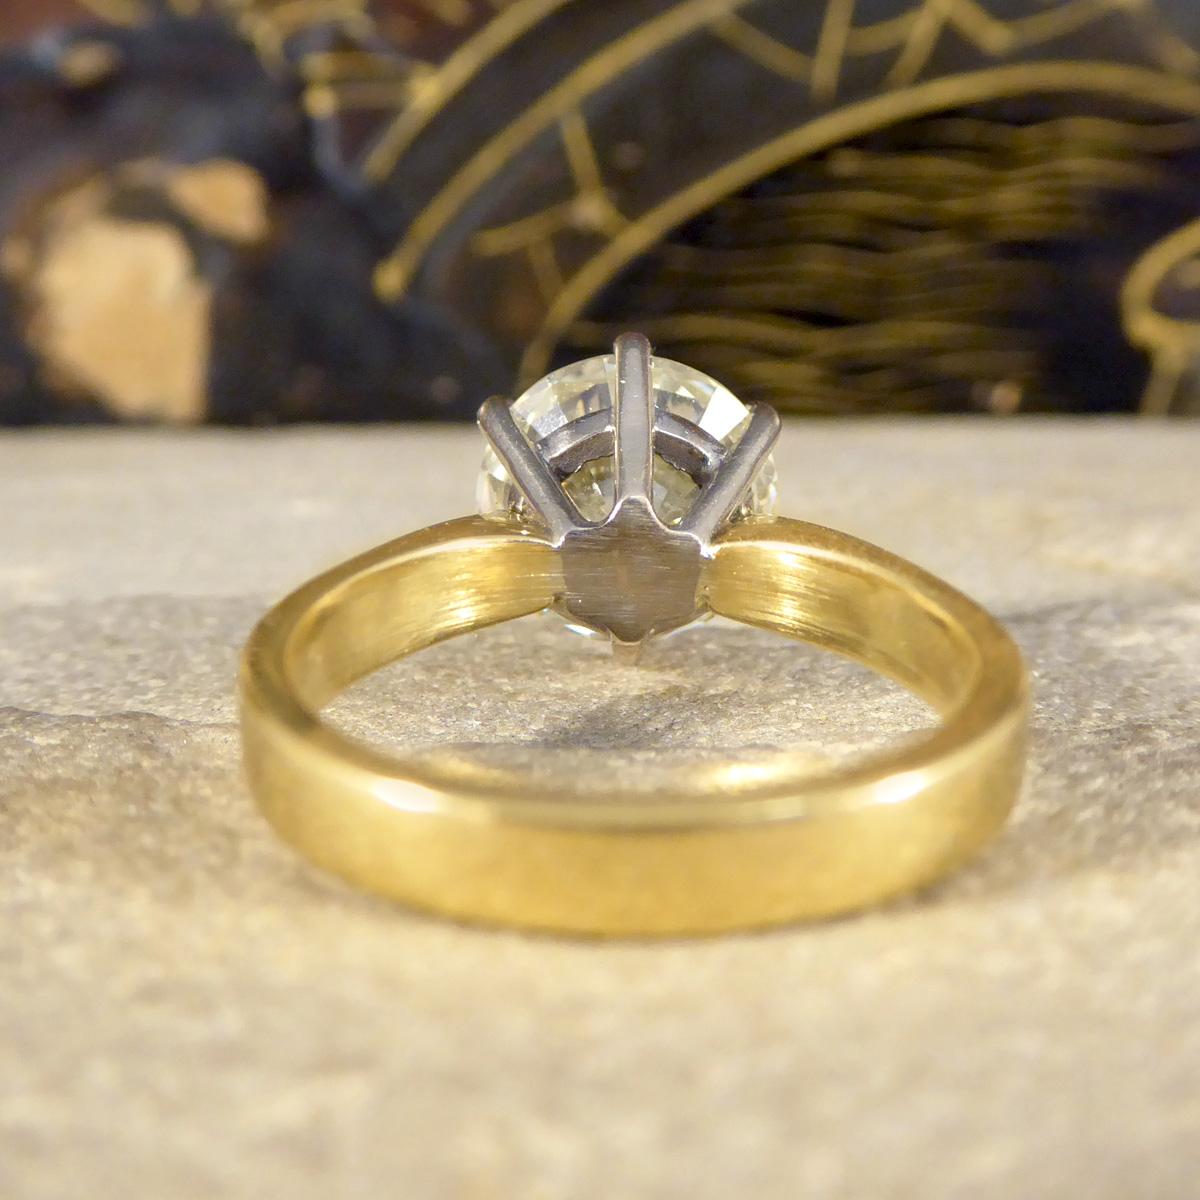 3.38ct Brilliant Cut Diamond Solitaire Engagement Ring in 18ct Gold In Good Condition For Sale In Yorkshire, West Yorkshire